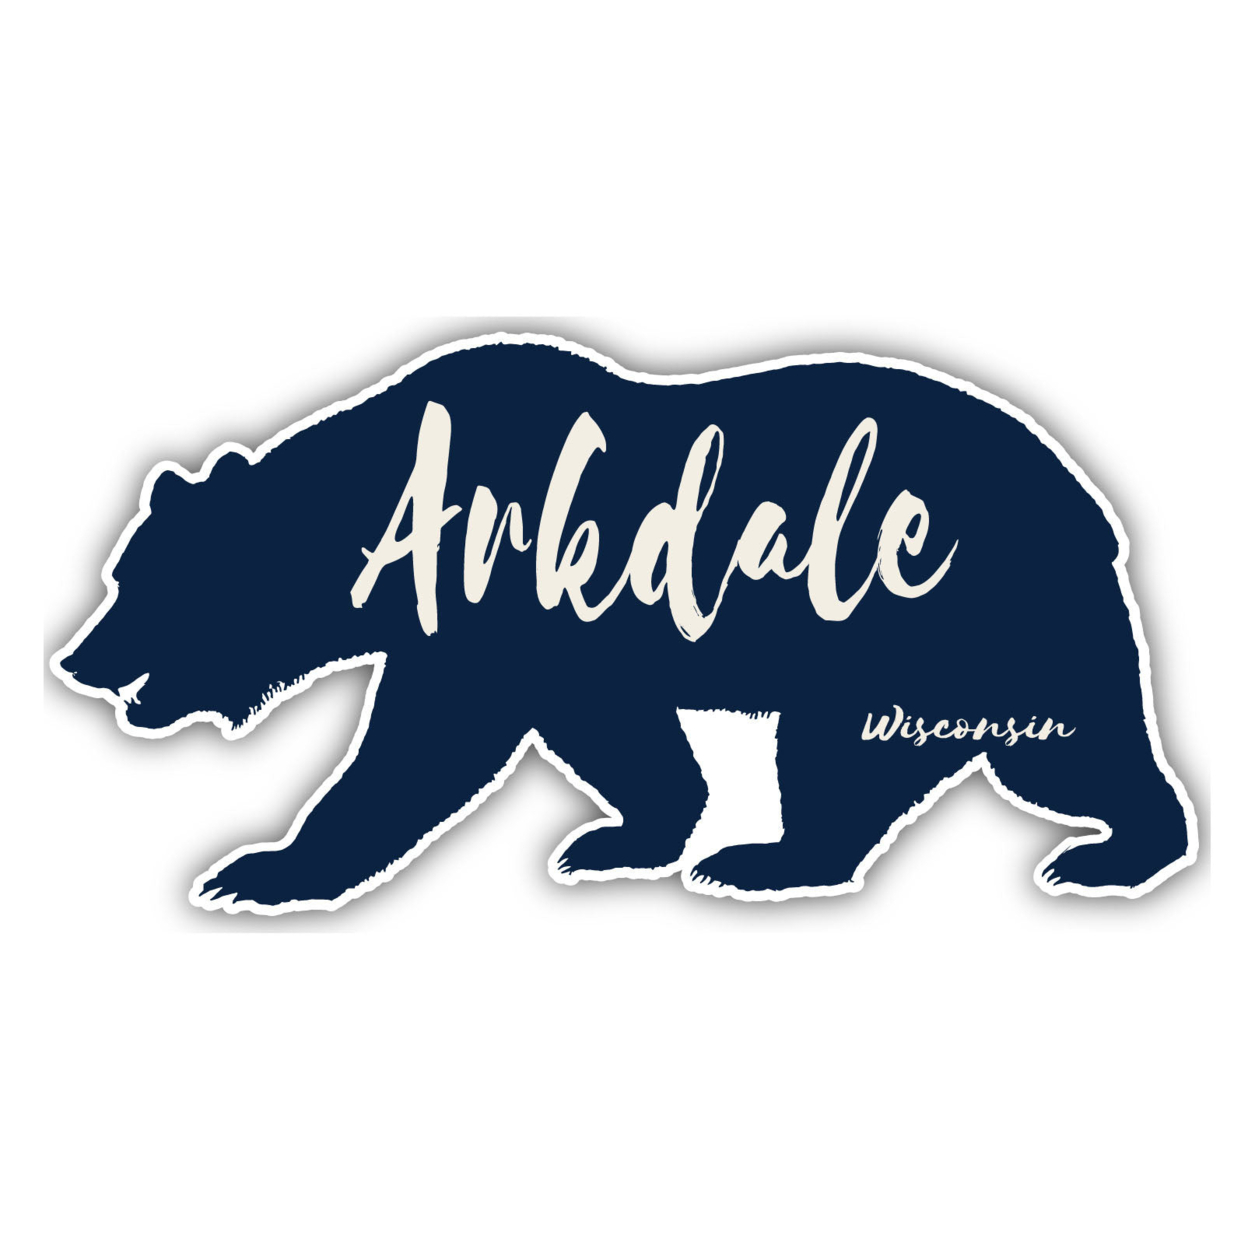 Arkdale Wisconsin Souvenir Decorative Stickers (Choose Theme And Size) - Single Unit, 4-Inch, Adventures Awaits